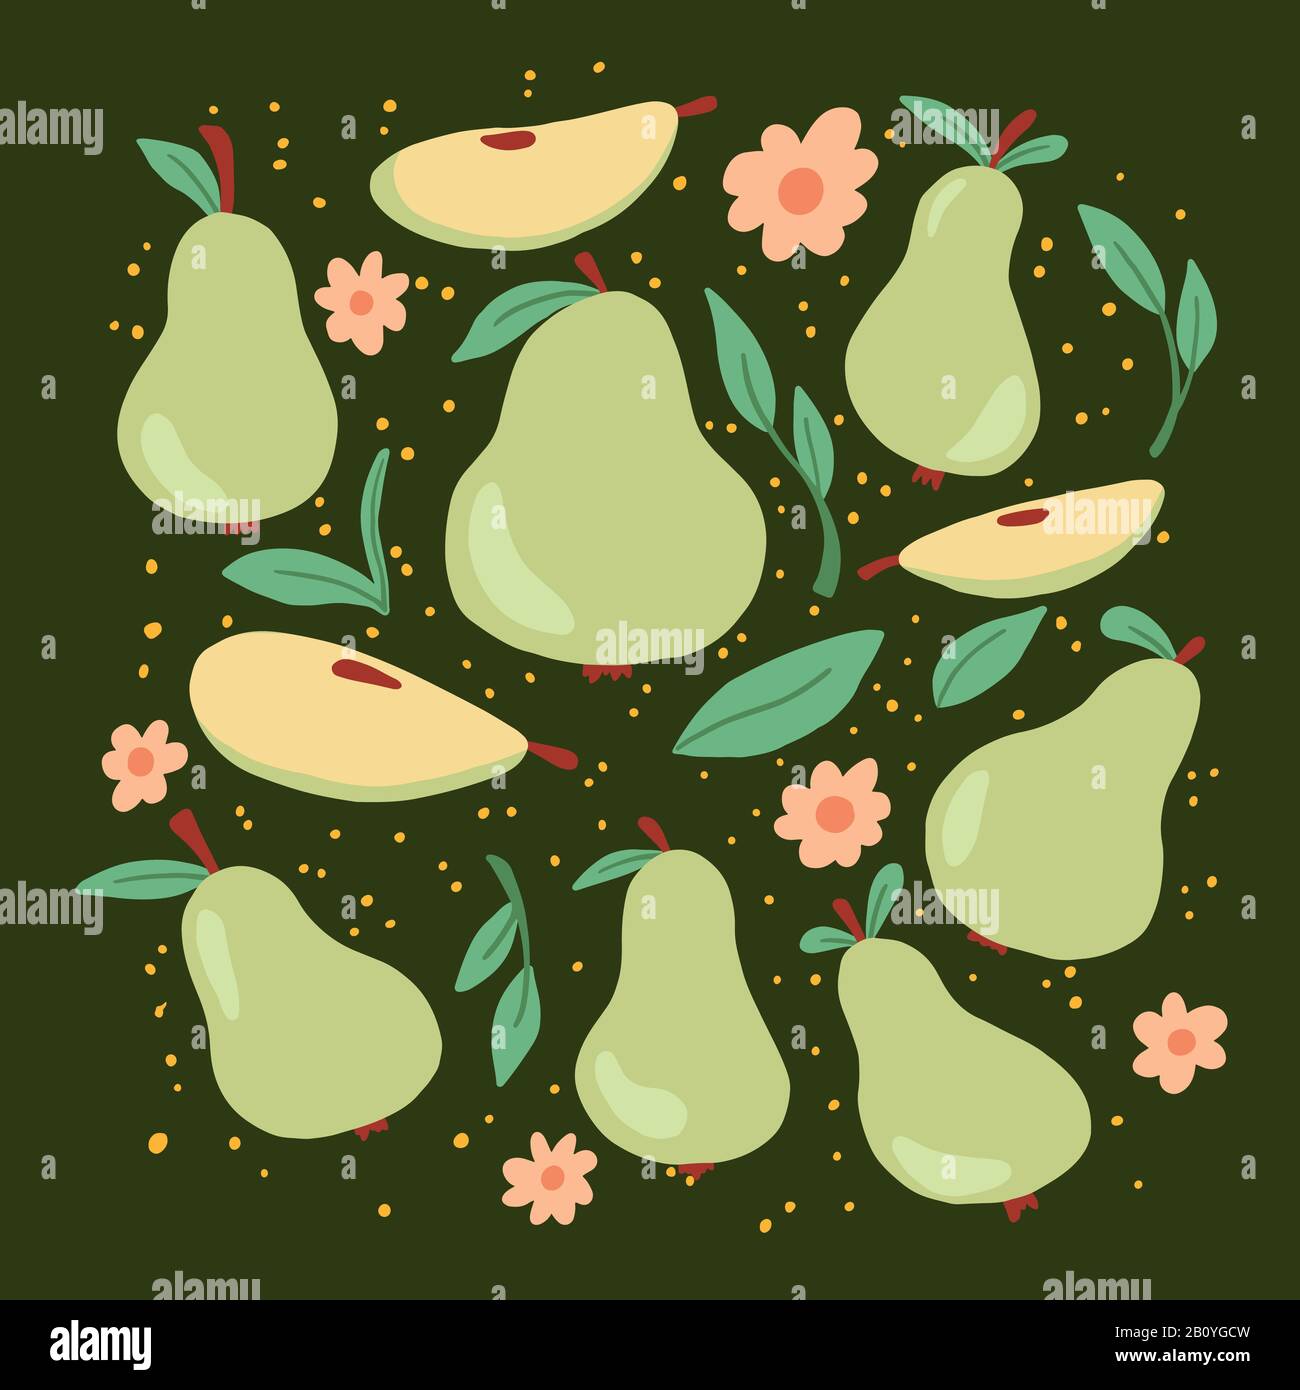 Set of green pear and sliced half pear with leaf and flowers. Cartoon hand drawn style. Isolated pear for fresh fruit, organic food, natural eat background, pattern design. Vector illustration. Stock Vector